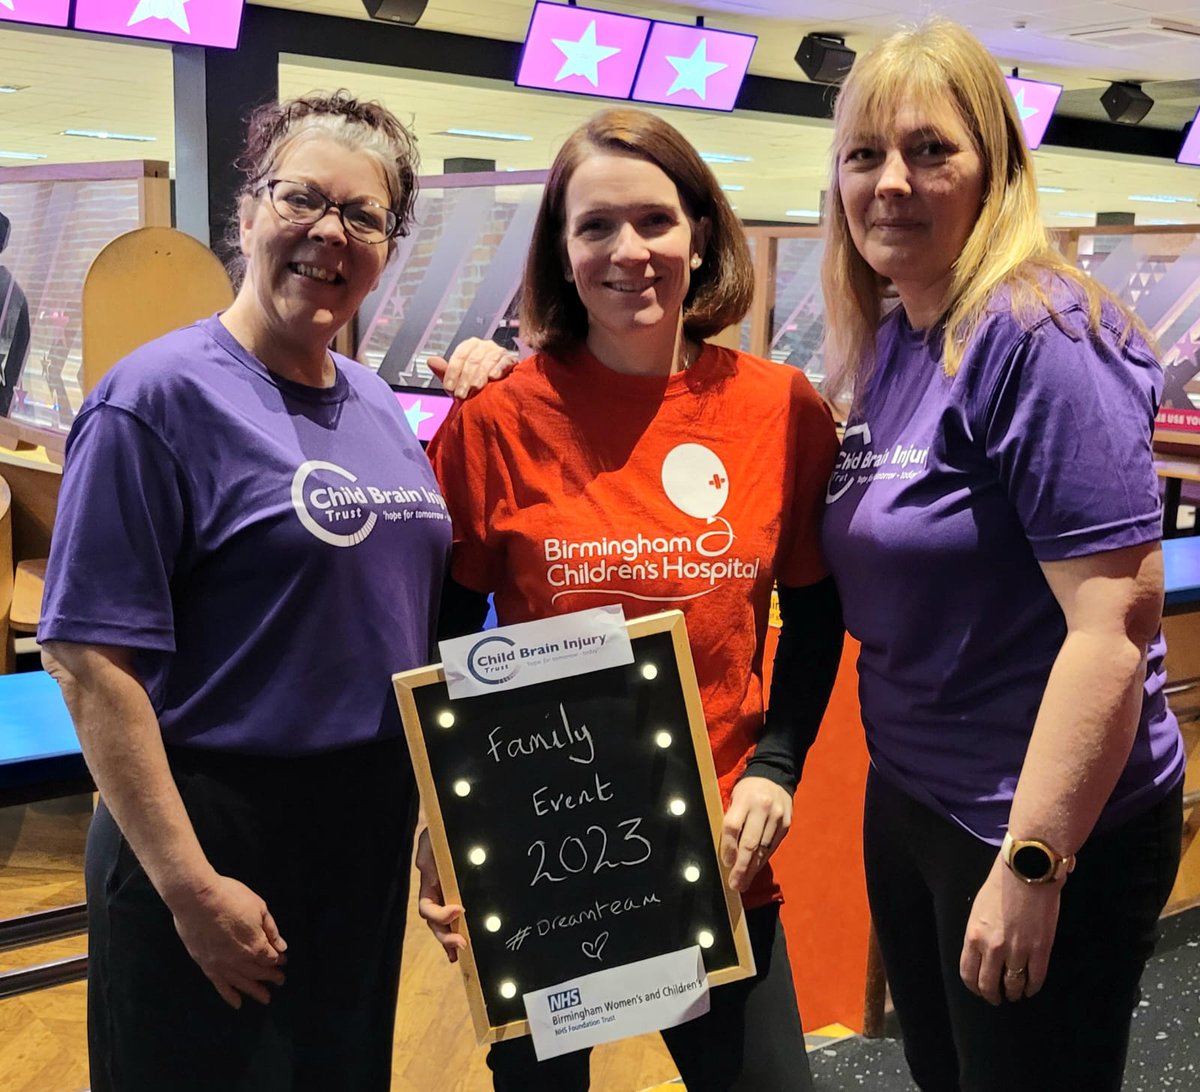 Annual family day for children & families following #acquiredbraininjury was a huge success. Special thanks to @cbituk @CbitMidlands @sarahpearceCbit who make these events so special. @BchMajorTrauma @BWC_NHS @EastwoodFarieda Thank you @HollywoodBowlUK